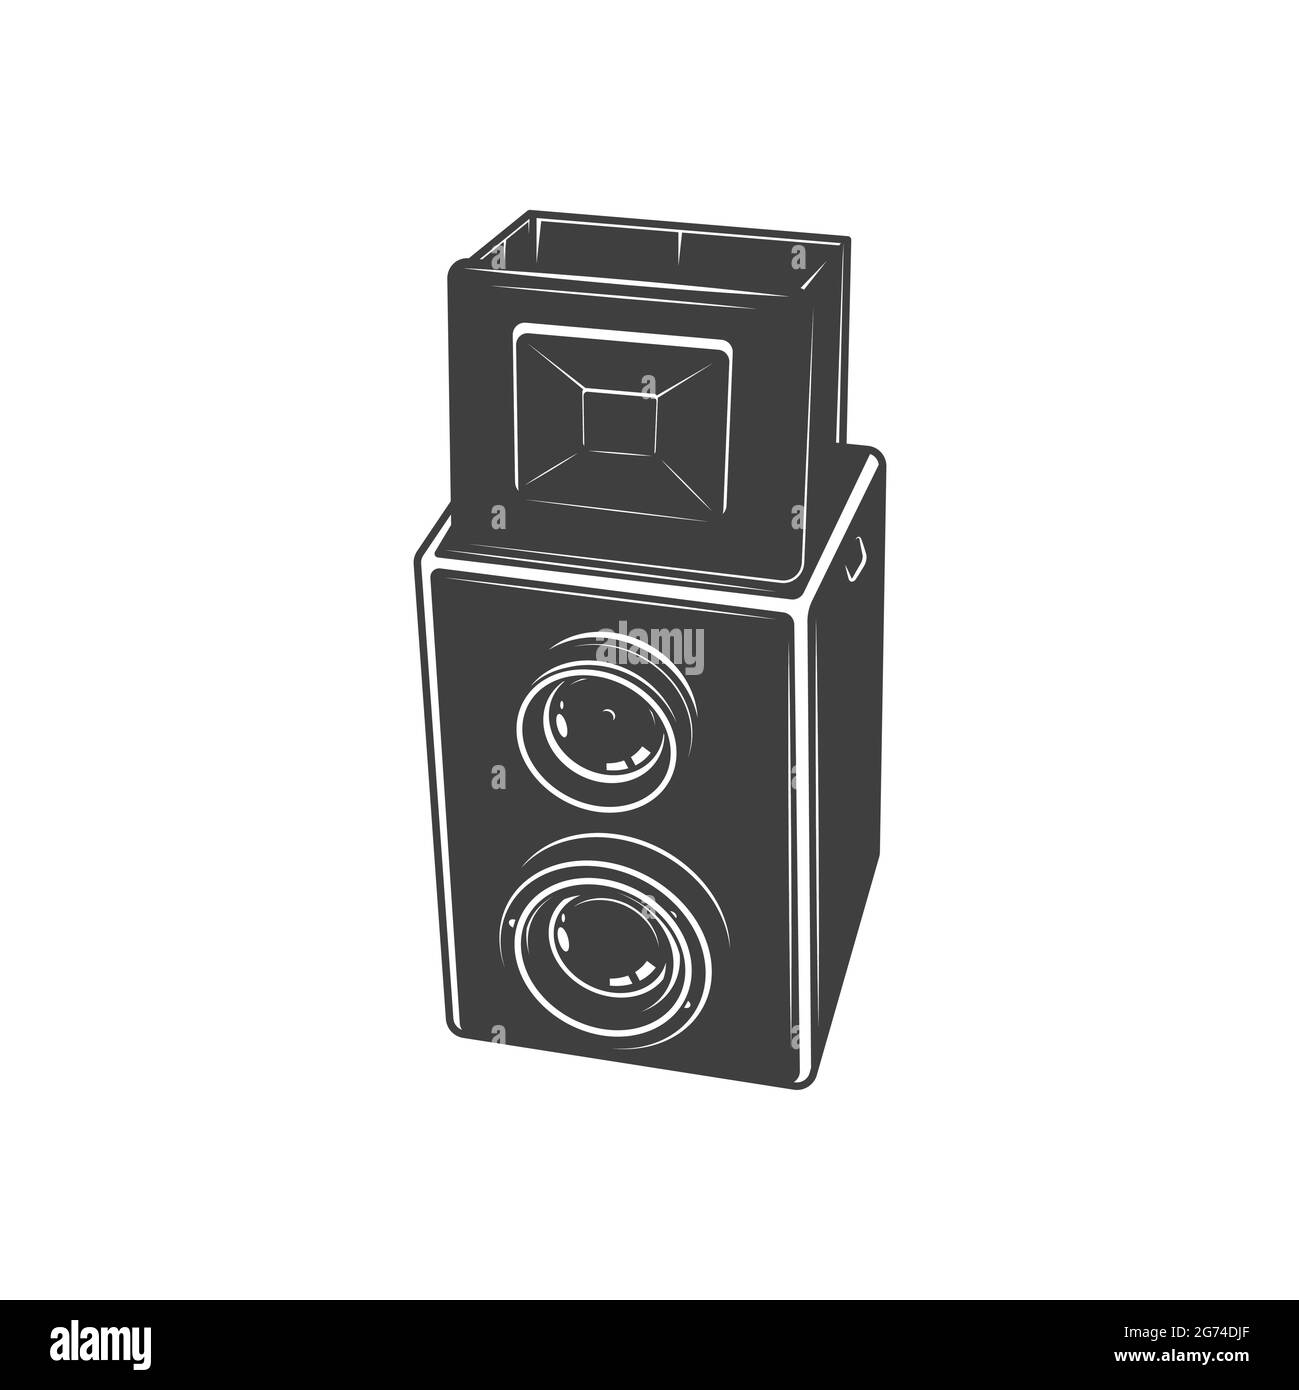 https://c8.alamy.com/comp/2G74DJF/film-reel-box-or-analog-photocamera-isolated-photo-shooting-equipment-monochrome-icon-vector-photographer-instrument-photo-camera-in-black-and-white-2G74DJF.jpg